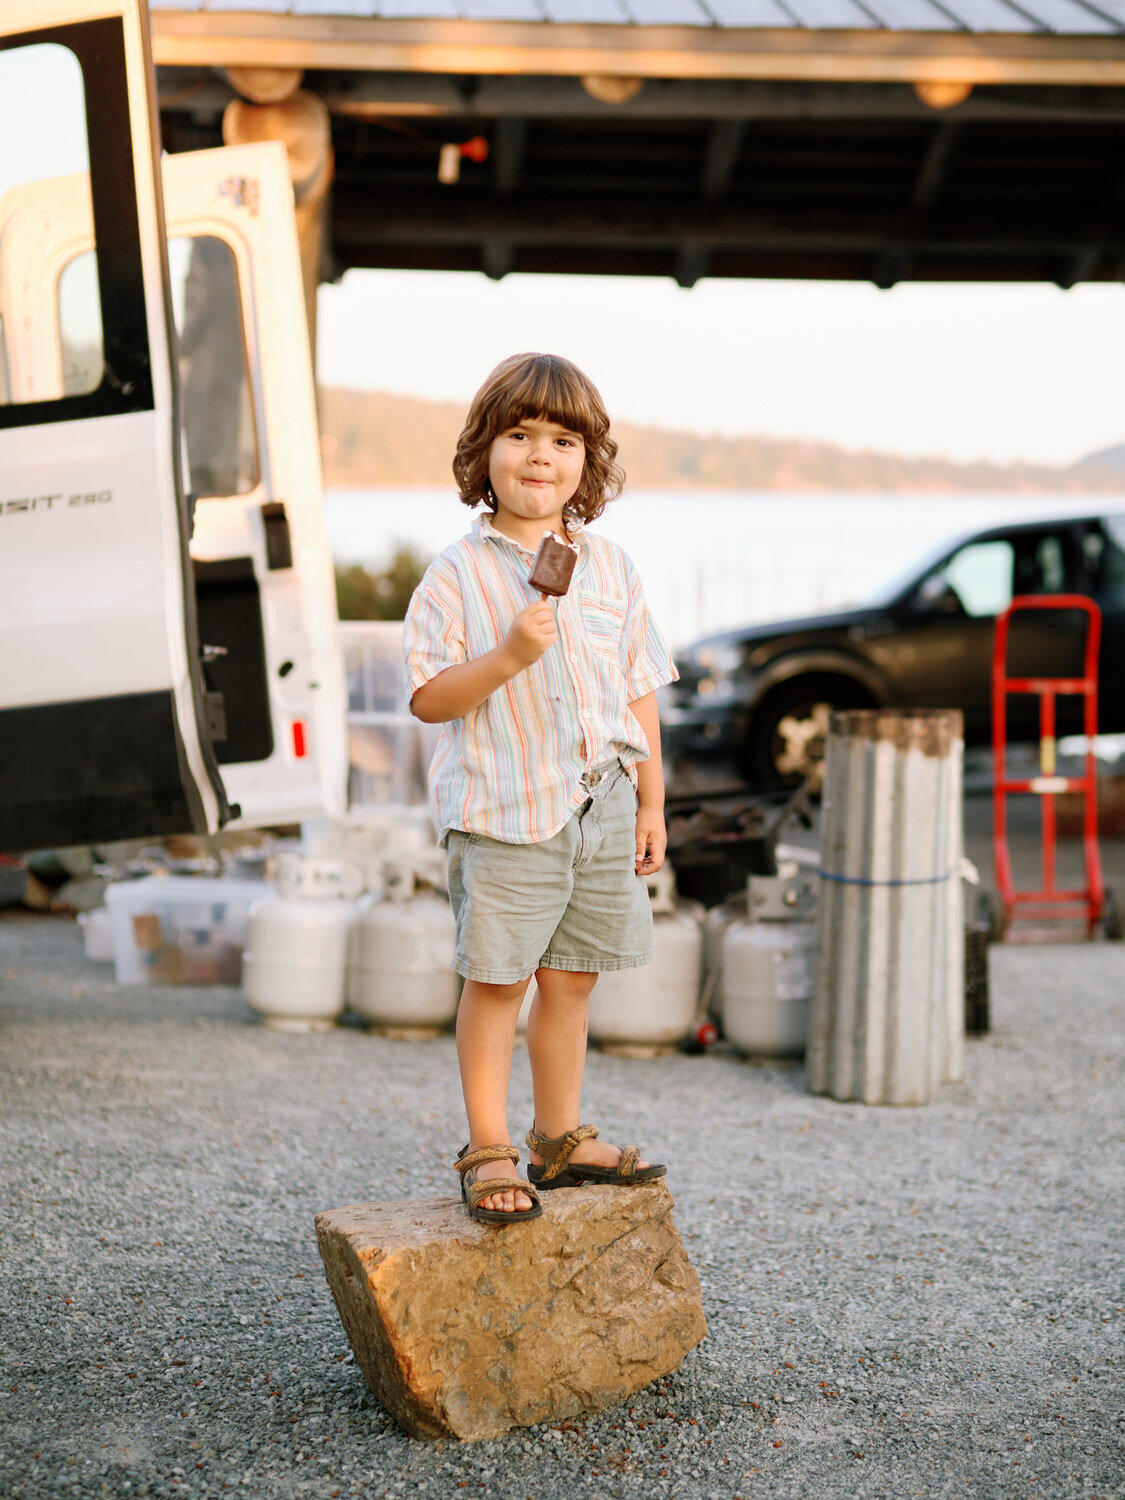 Young wedding guest stands on a rock eating an ice cream